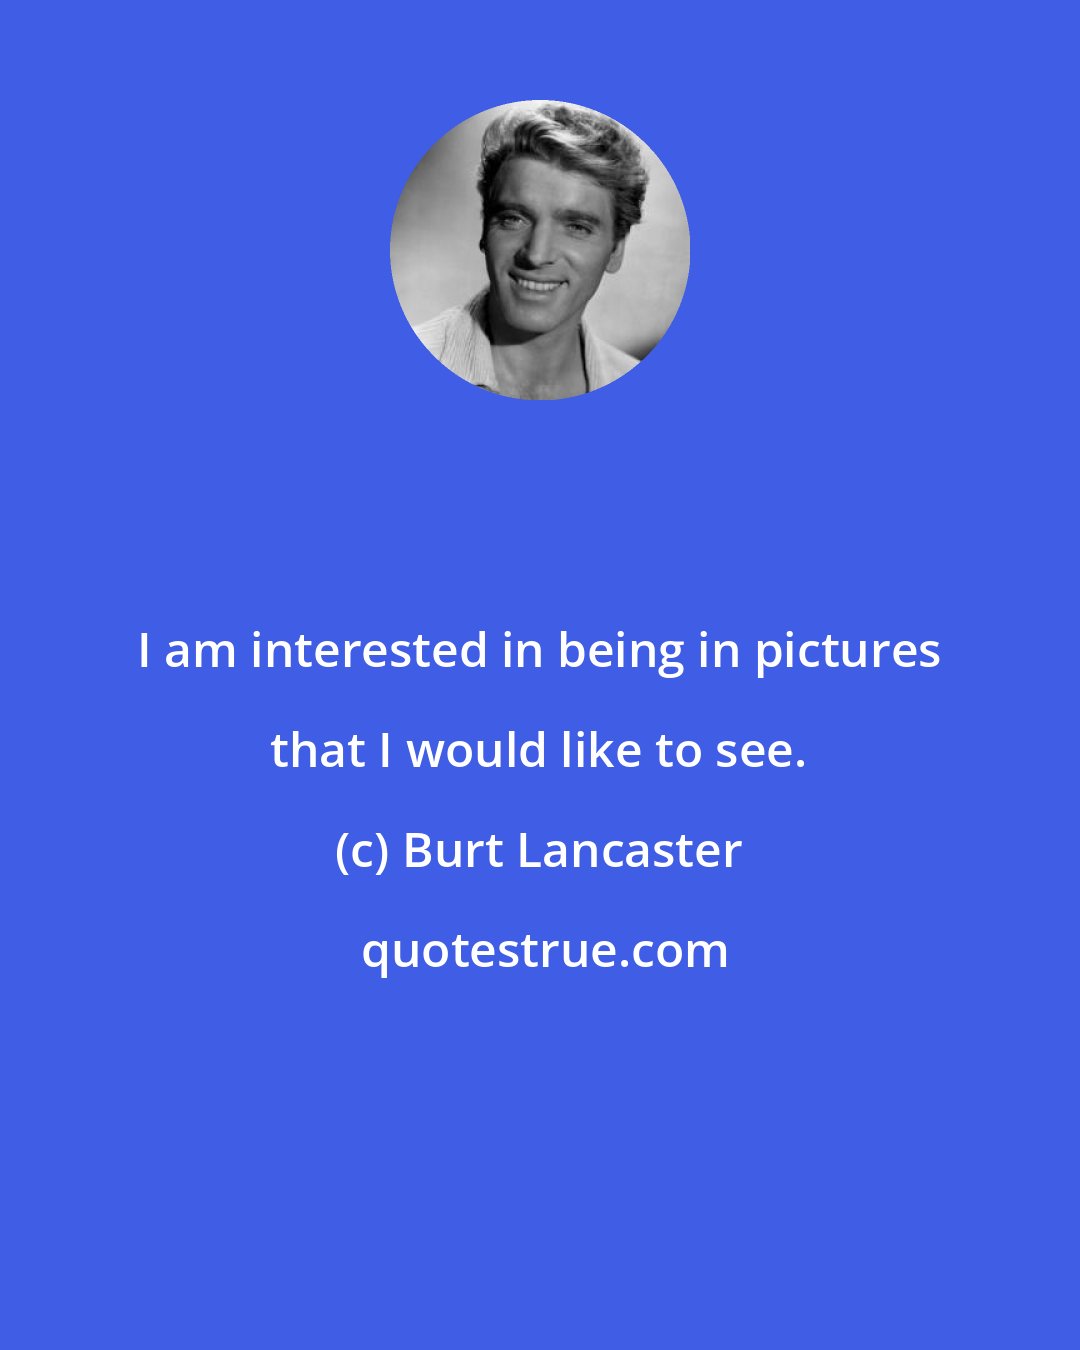 Burt Lancaster: I am interested in being in pictures that I would like to see.